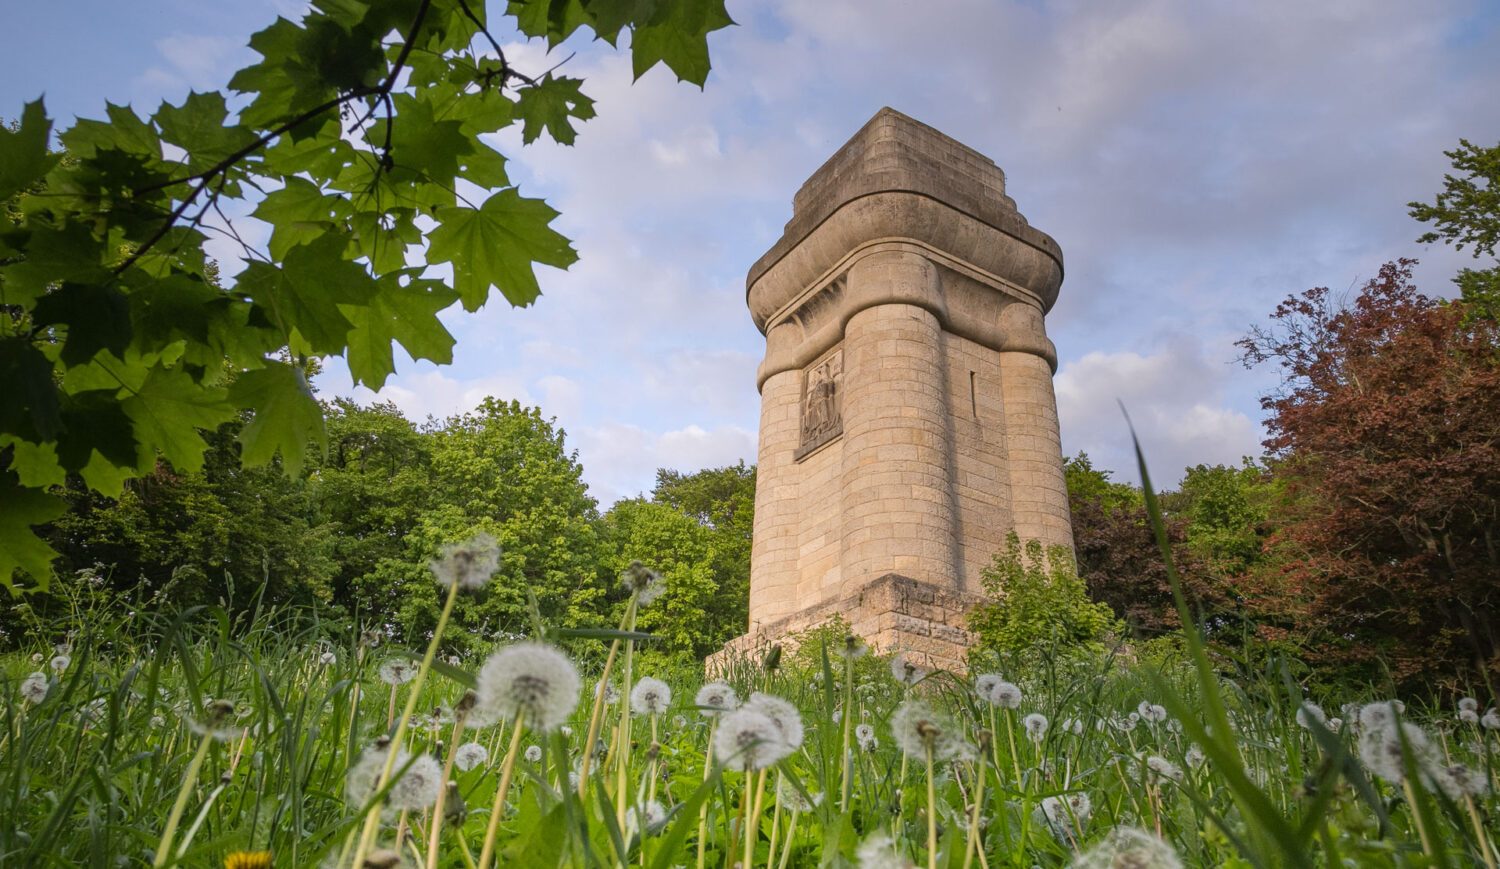 The Bismarck Tower was erected in 1902 to 1903 as a monument to Bismarck and today serves as an observation tower © Hildesheim Marketing GmbH The Bismarck Tower was erected in 1902 to 1903 as a monument to Bismarck and today serves as an observation tower © Hildesheim Marketing GmbH